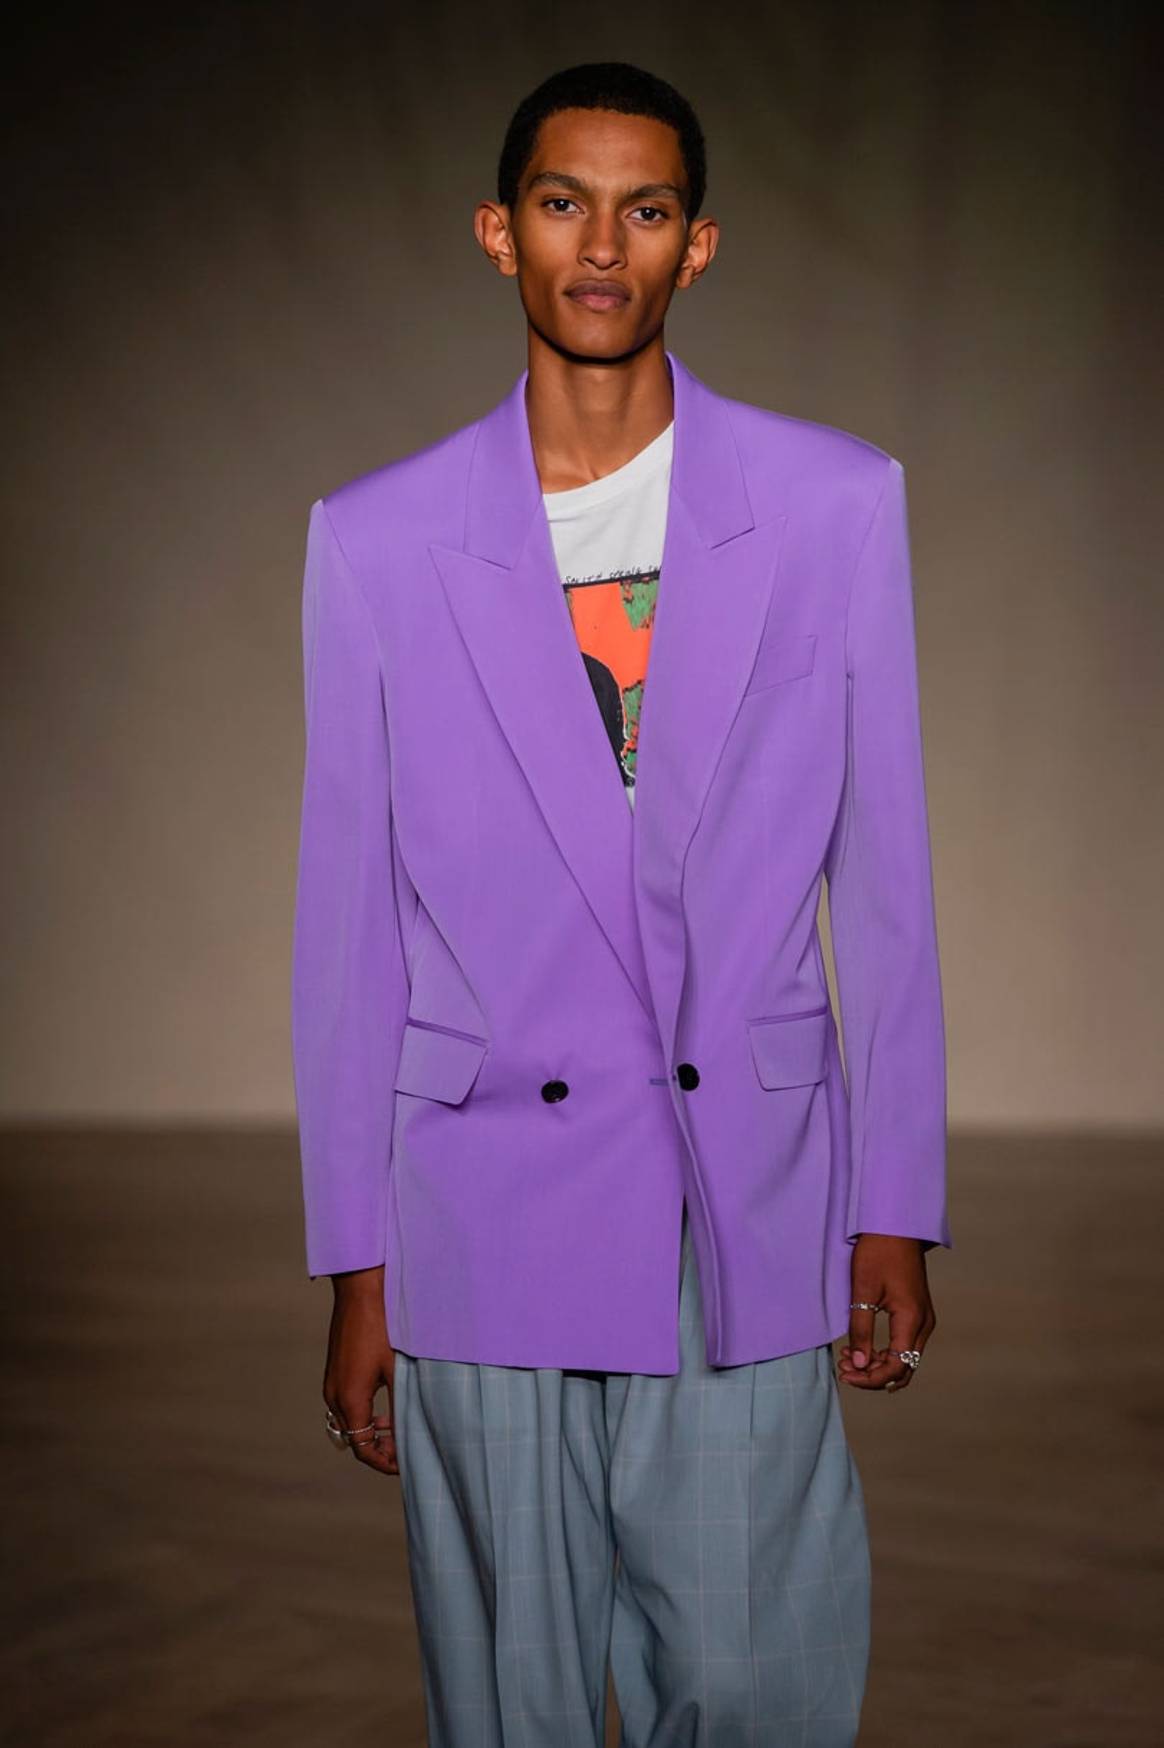 In Pictures: Paul Smith reinvigorates the suit at Paris Fashion Week